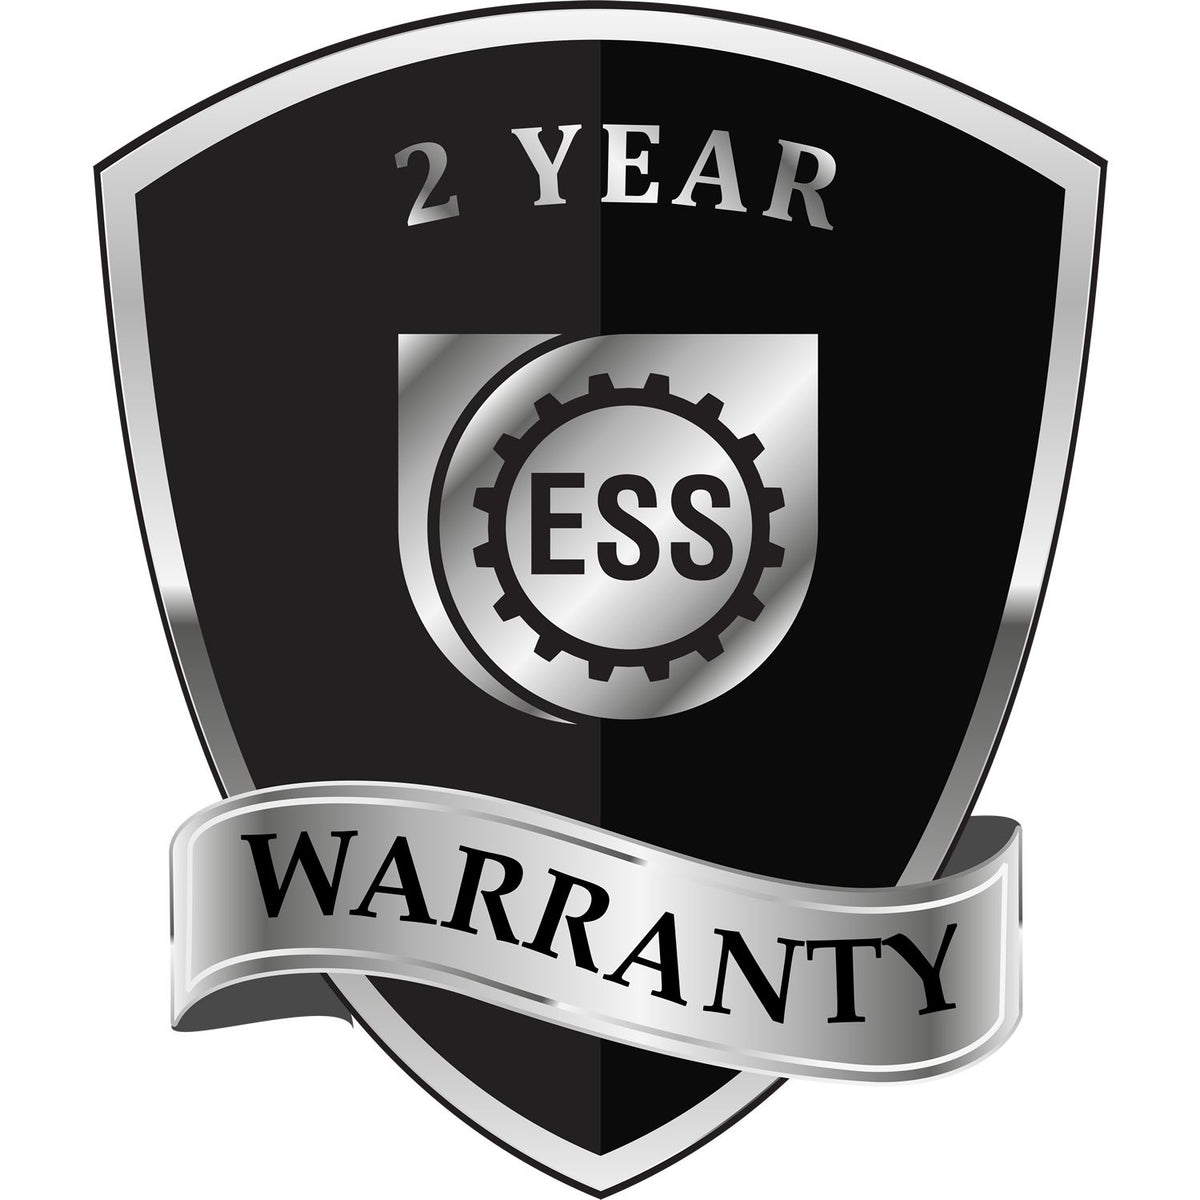 A black and silver badge or emblem showing warranty information for the Gift Indiana Landscape Architect Seal